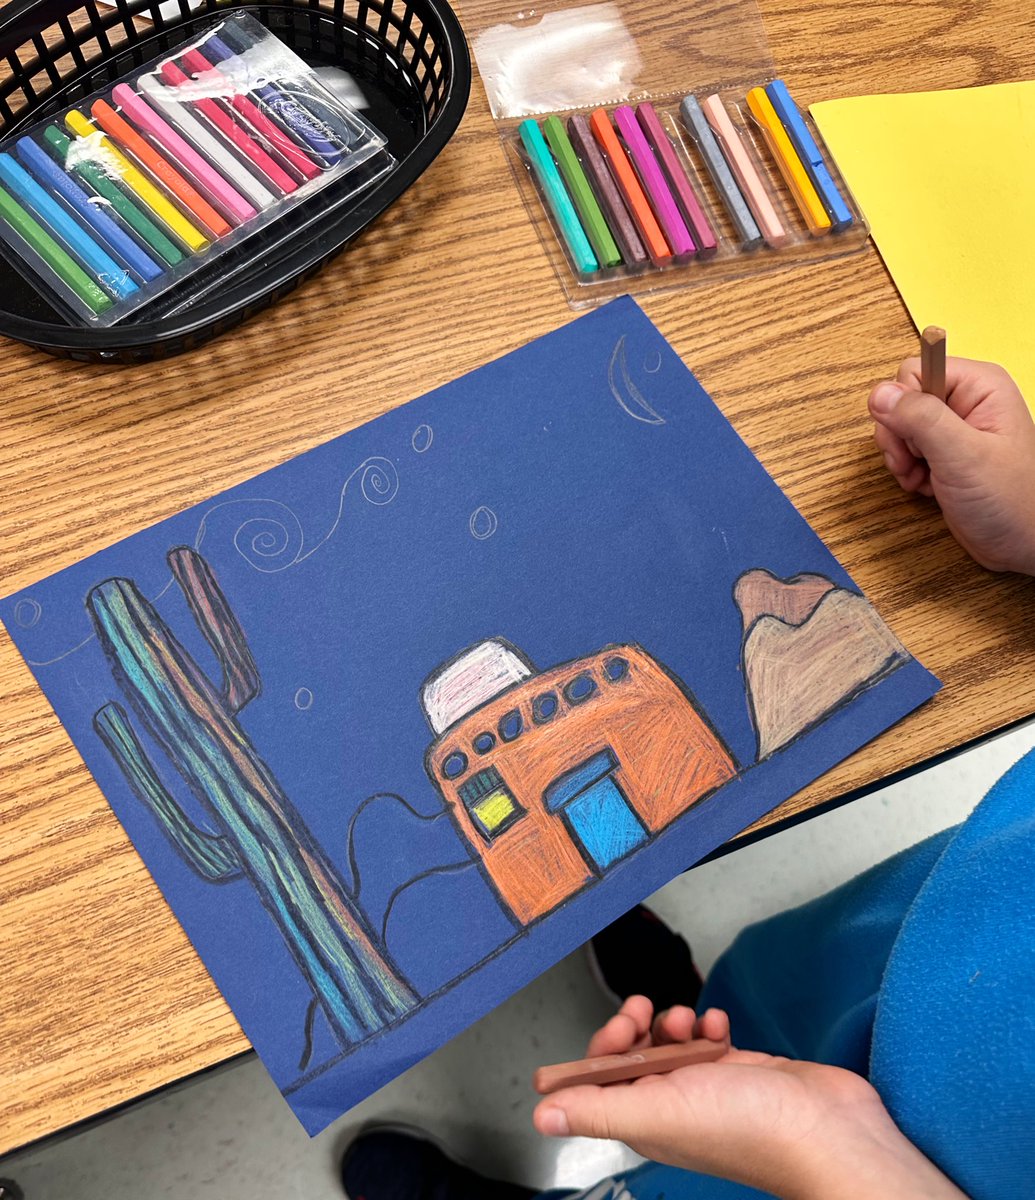 Van Gogh’s Starry Night with a twist! I love how these Pueblo Starry Night landscapes are turning out! 🌵🌌🌙 #VanGogh #StarryNight @BBE_Bullfrogs @BBESpecials